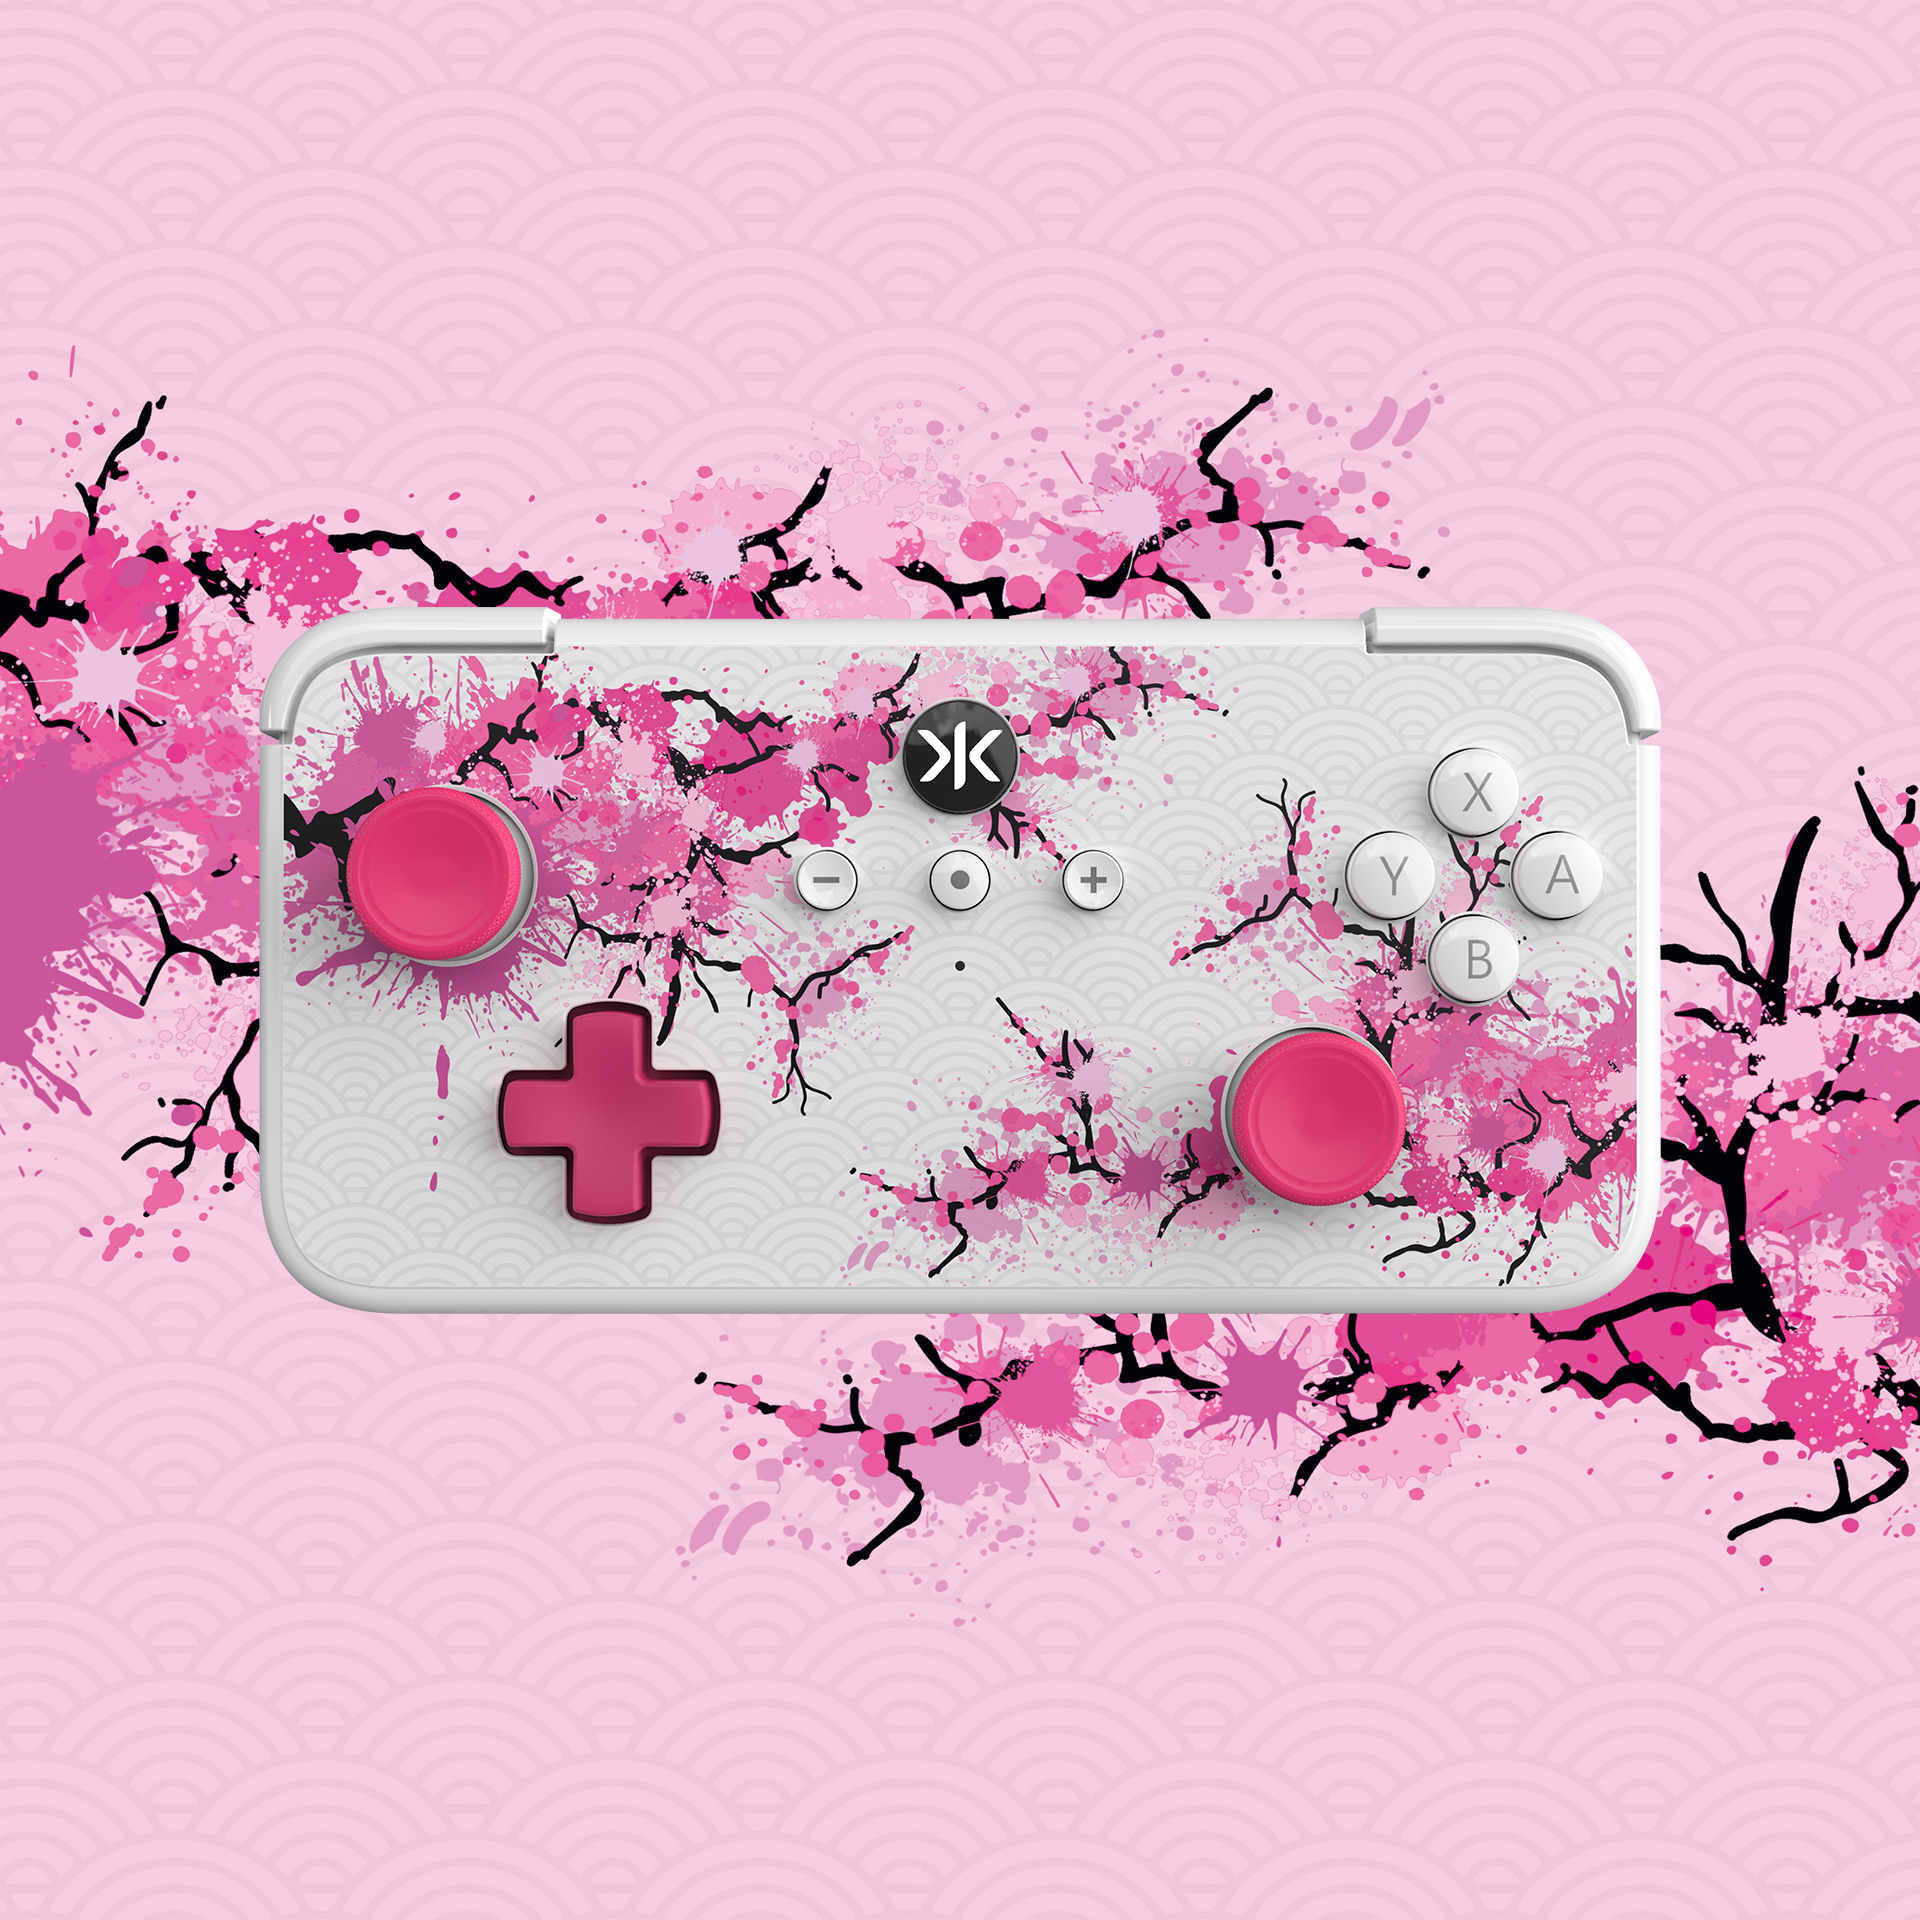 NEO S Blossom Edition by POPeART